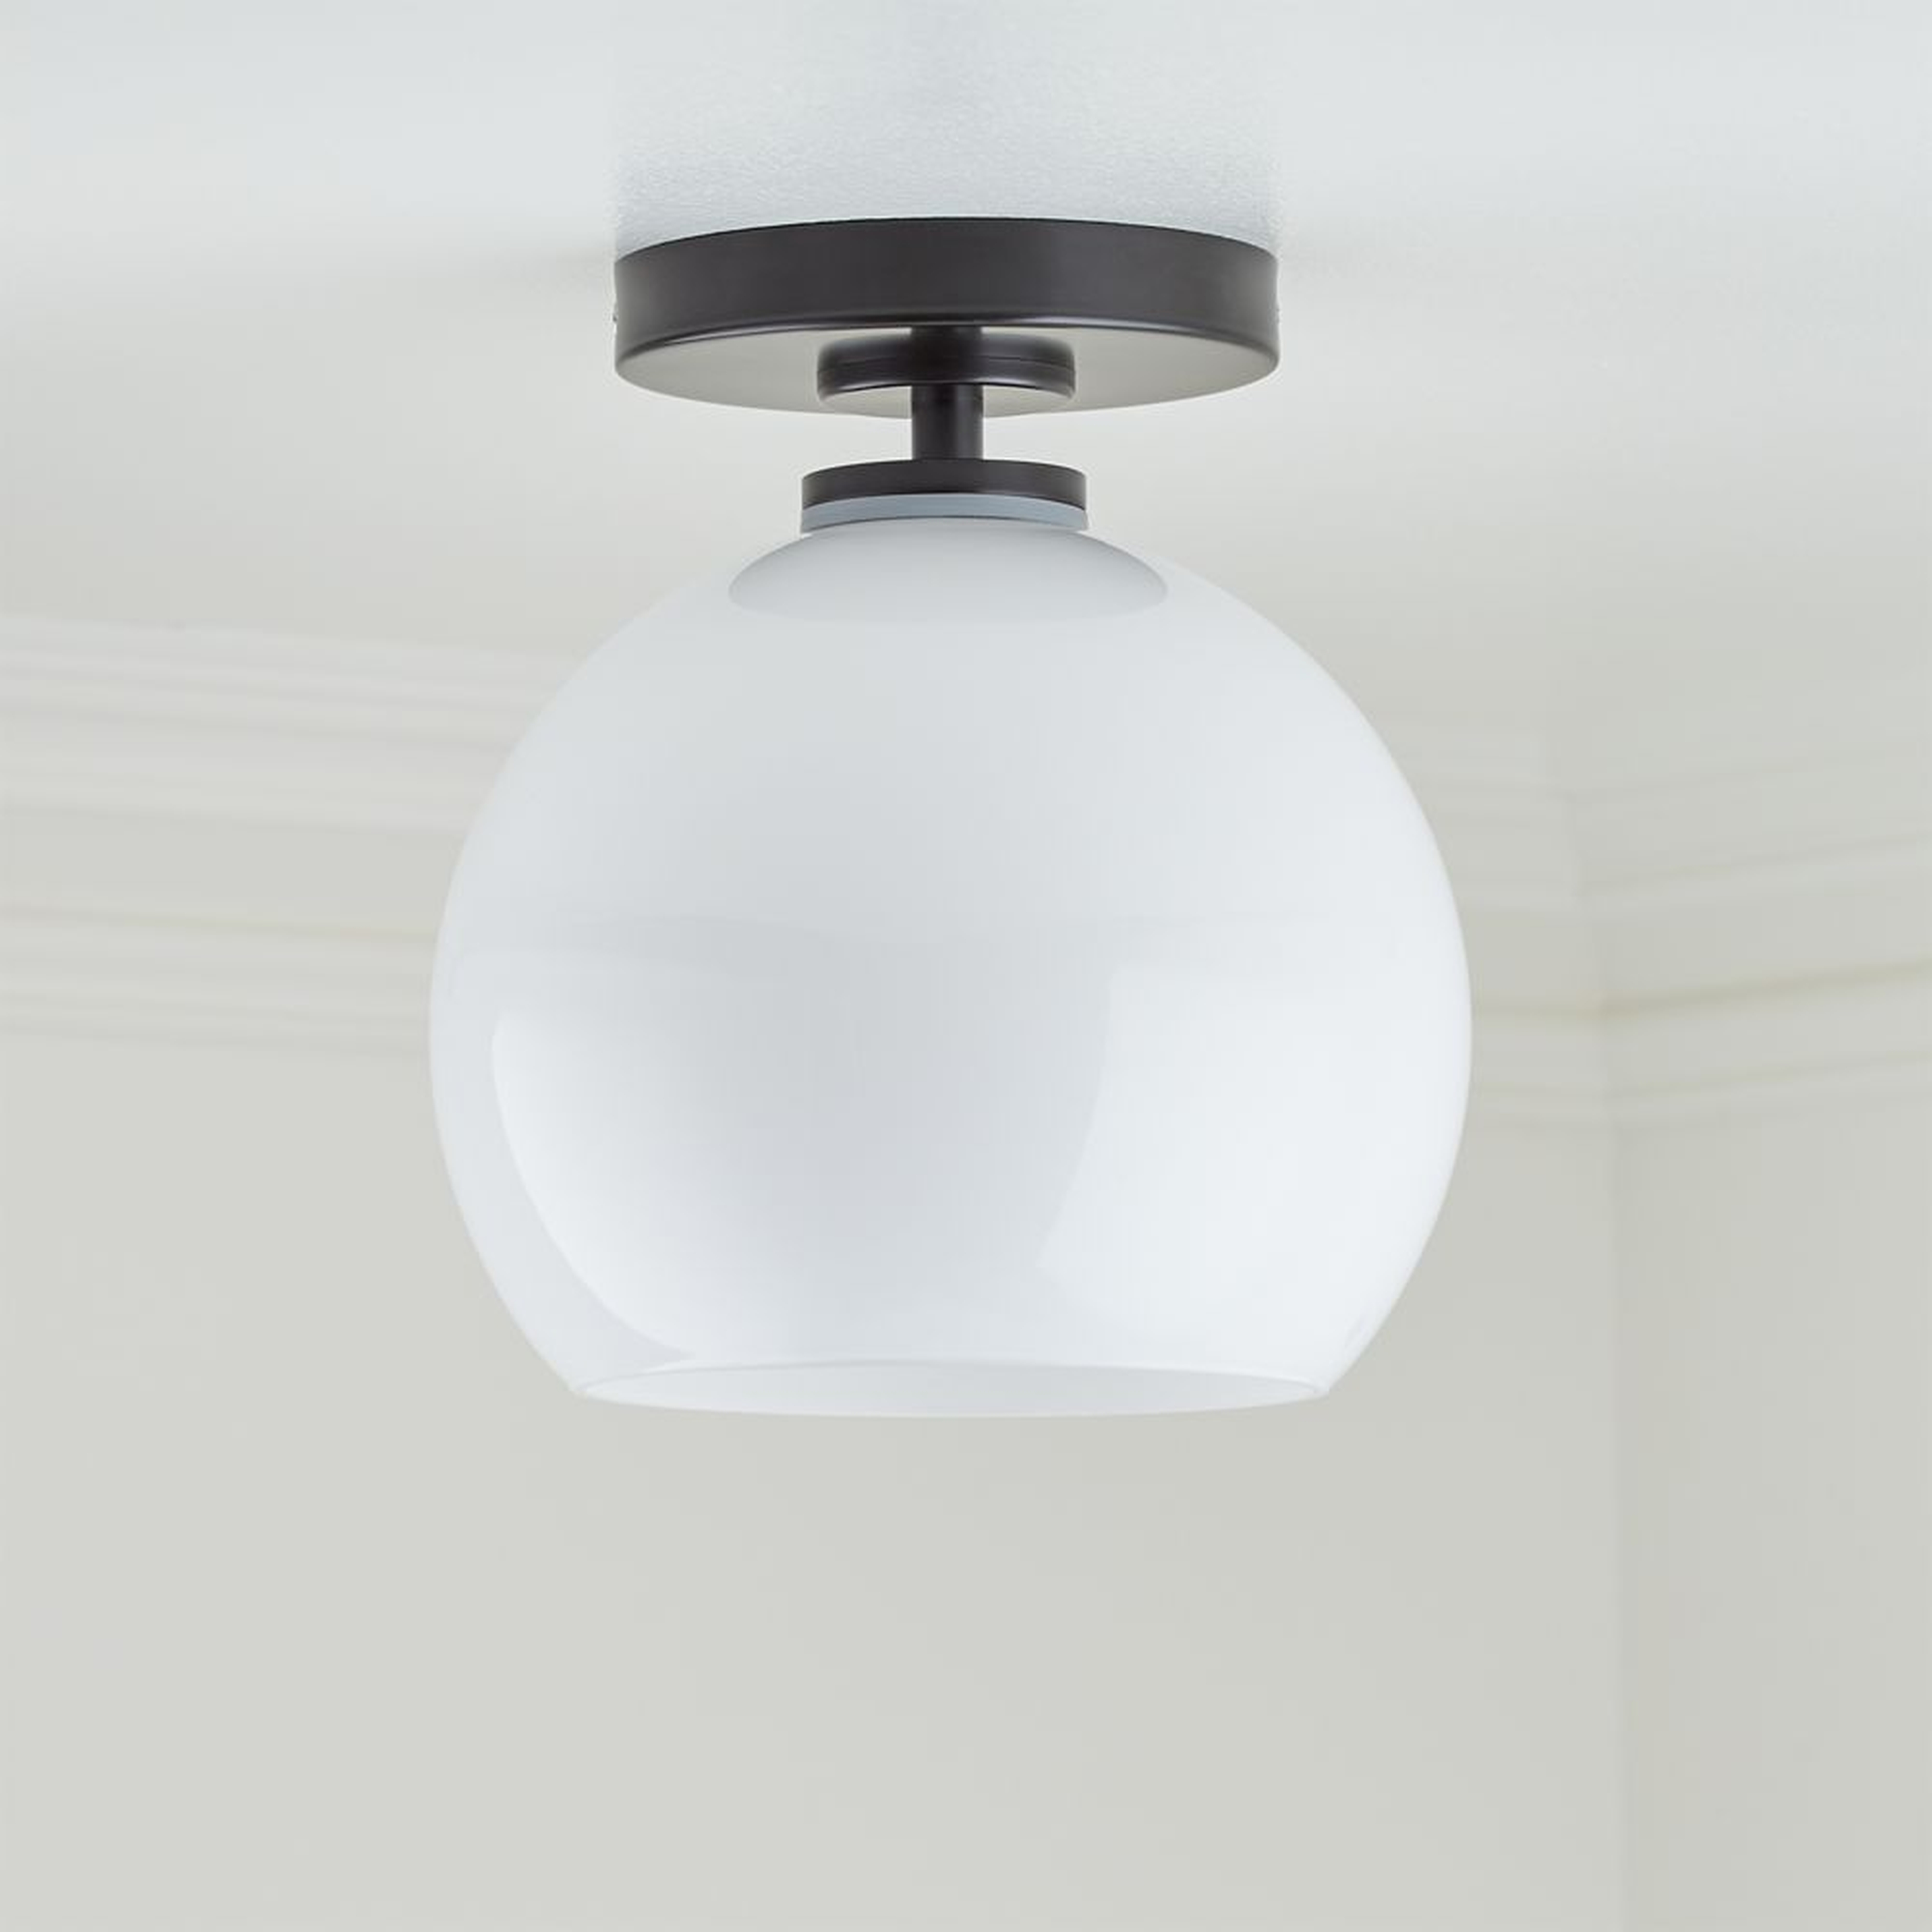 Arren Black Flush Mount Light with Milk Round Shade - Crate and Barrel